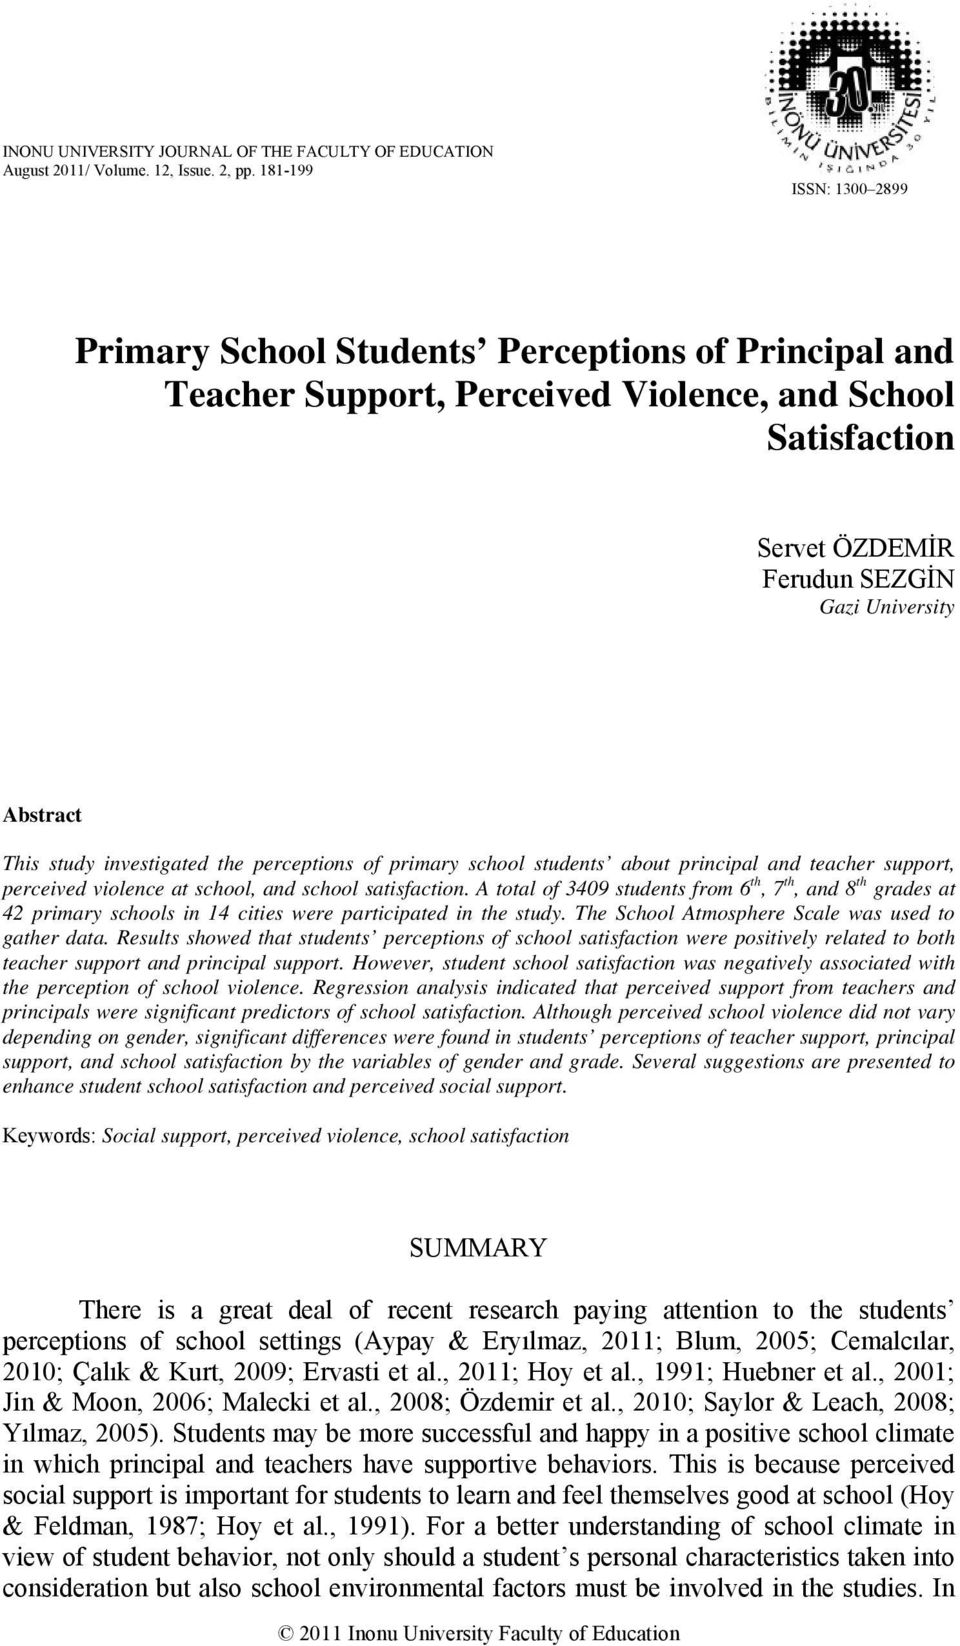 study investigated the perceptions of primary school students about principal and teacher support, perceived violence at school, and school satisfaction.